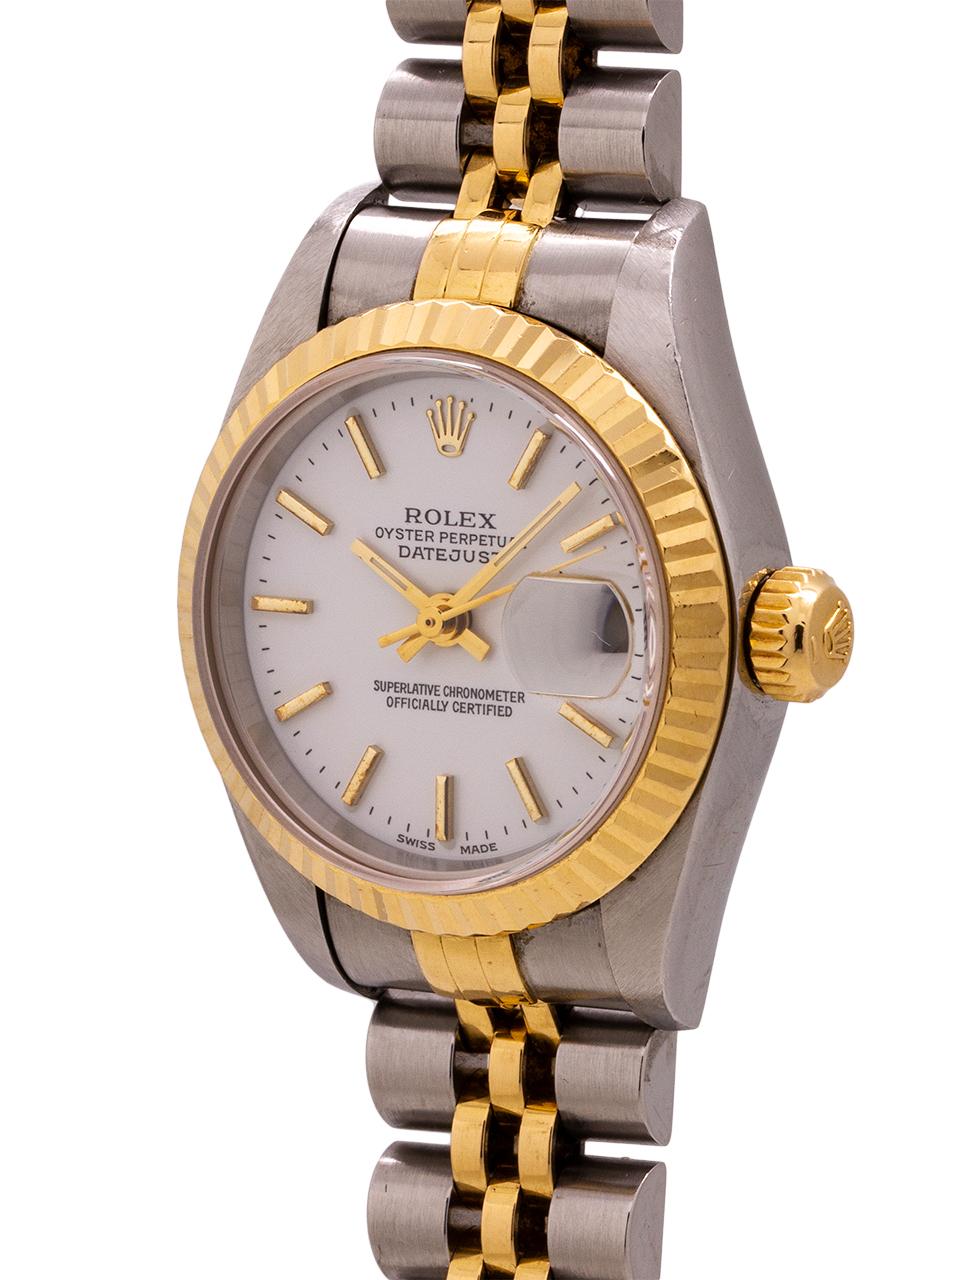 Lady Rolex Datejust stainless steel and 18k yellow gold ref# 79173 26mm diameter case with 18K gold fluted bezel, sapphire crystal, and original white dial with applied gold stick numerals circa 1998. Powered by self winding movement with sweep